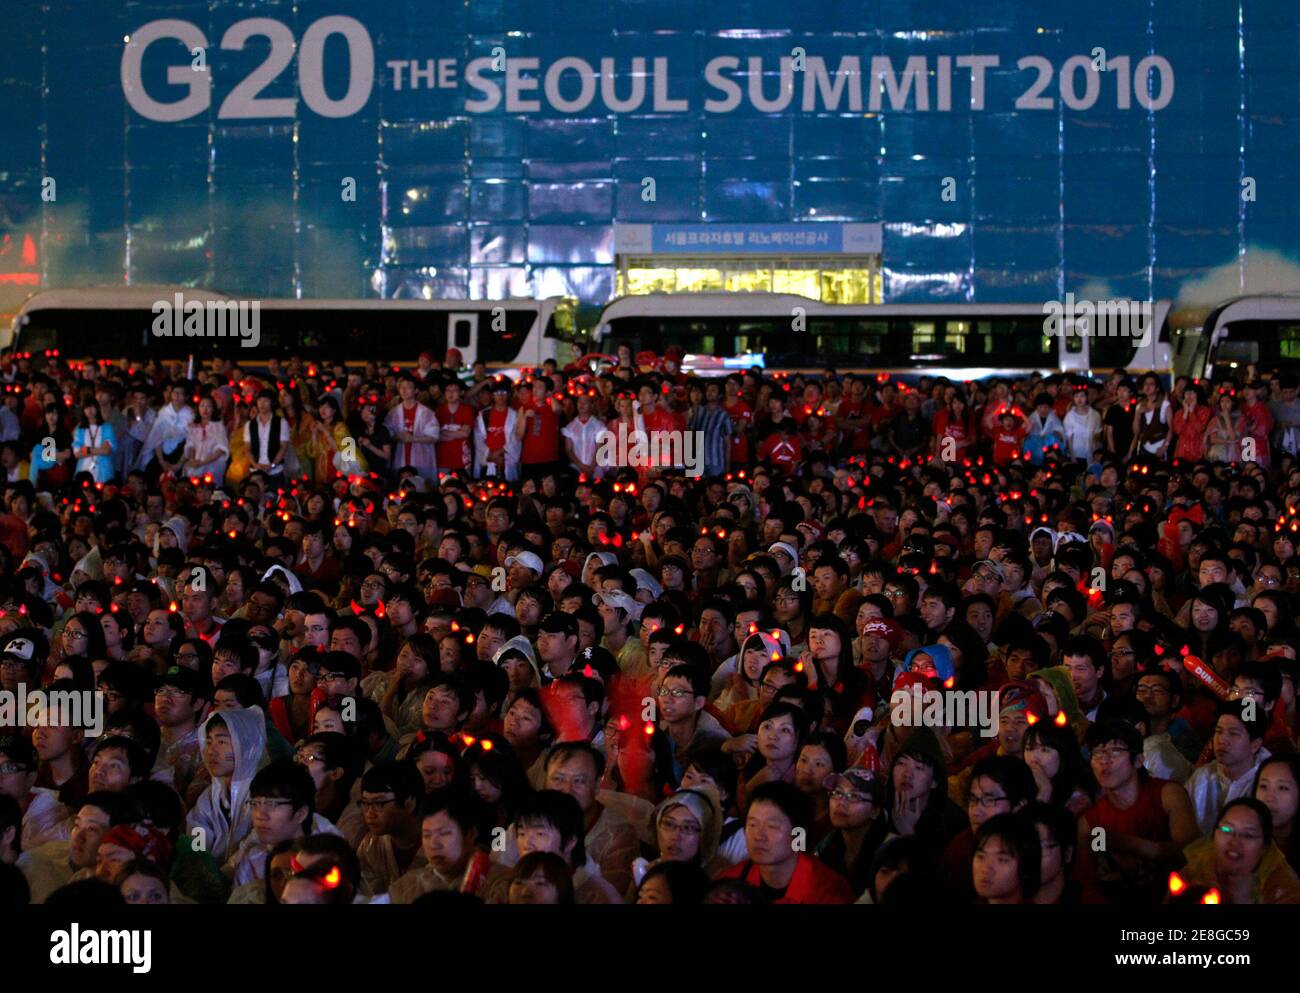 South Korean fans watch a live TV broadcast of the 2010 World Cup soccer match against Uruguay in South Africa, at the Seoul City Hall Plaza June 27, 2010. Uruguay won 2-1.  REUTERS/Jo Yong-Hak (SOUTH KOREA - Tags: SPORT SOCCER WORLD CUP) Stock Photo